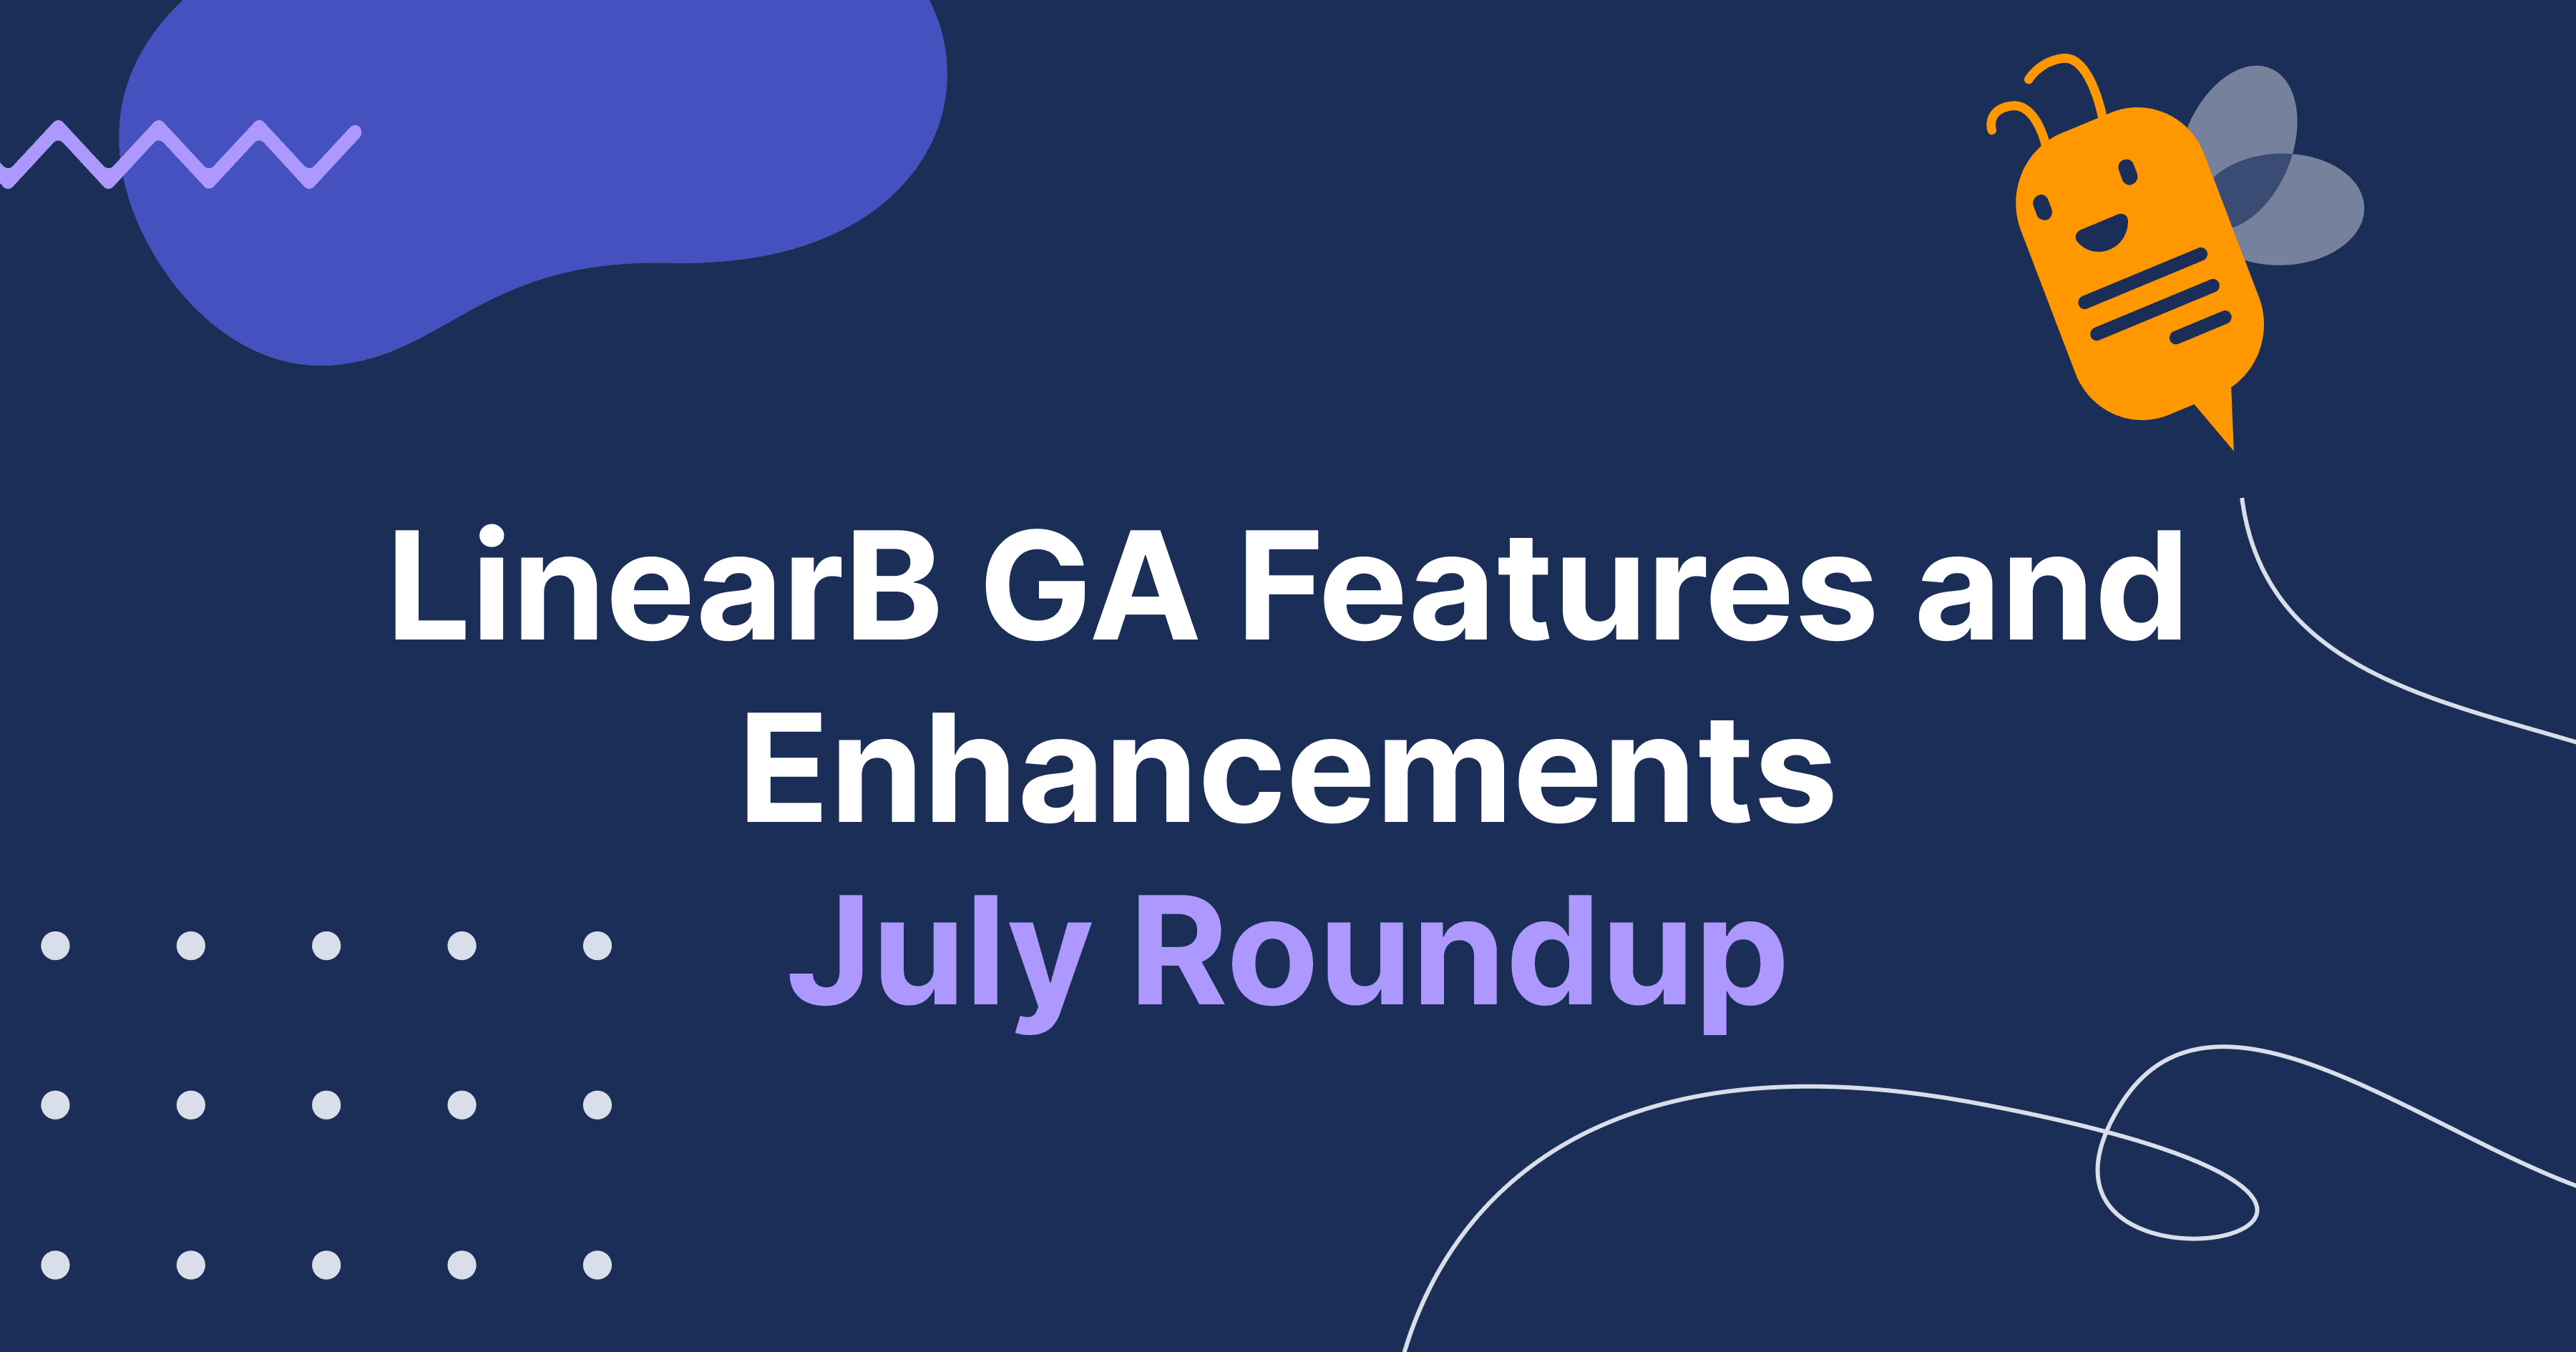 LinearB GA Features and Enhancements - July Roundup